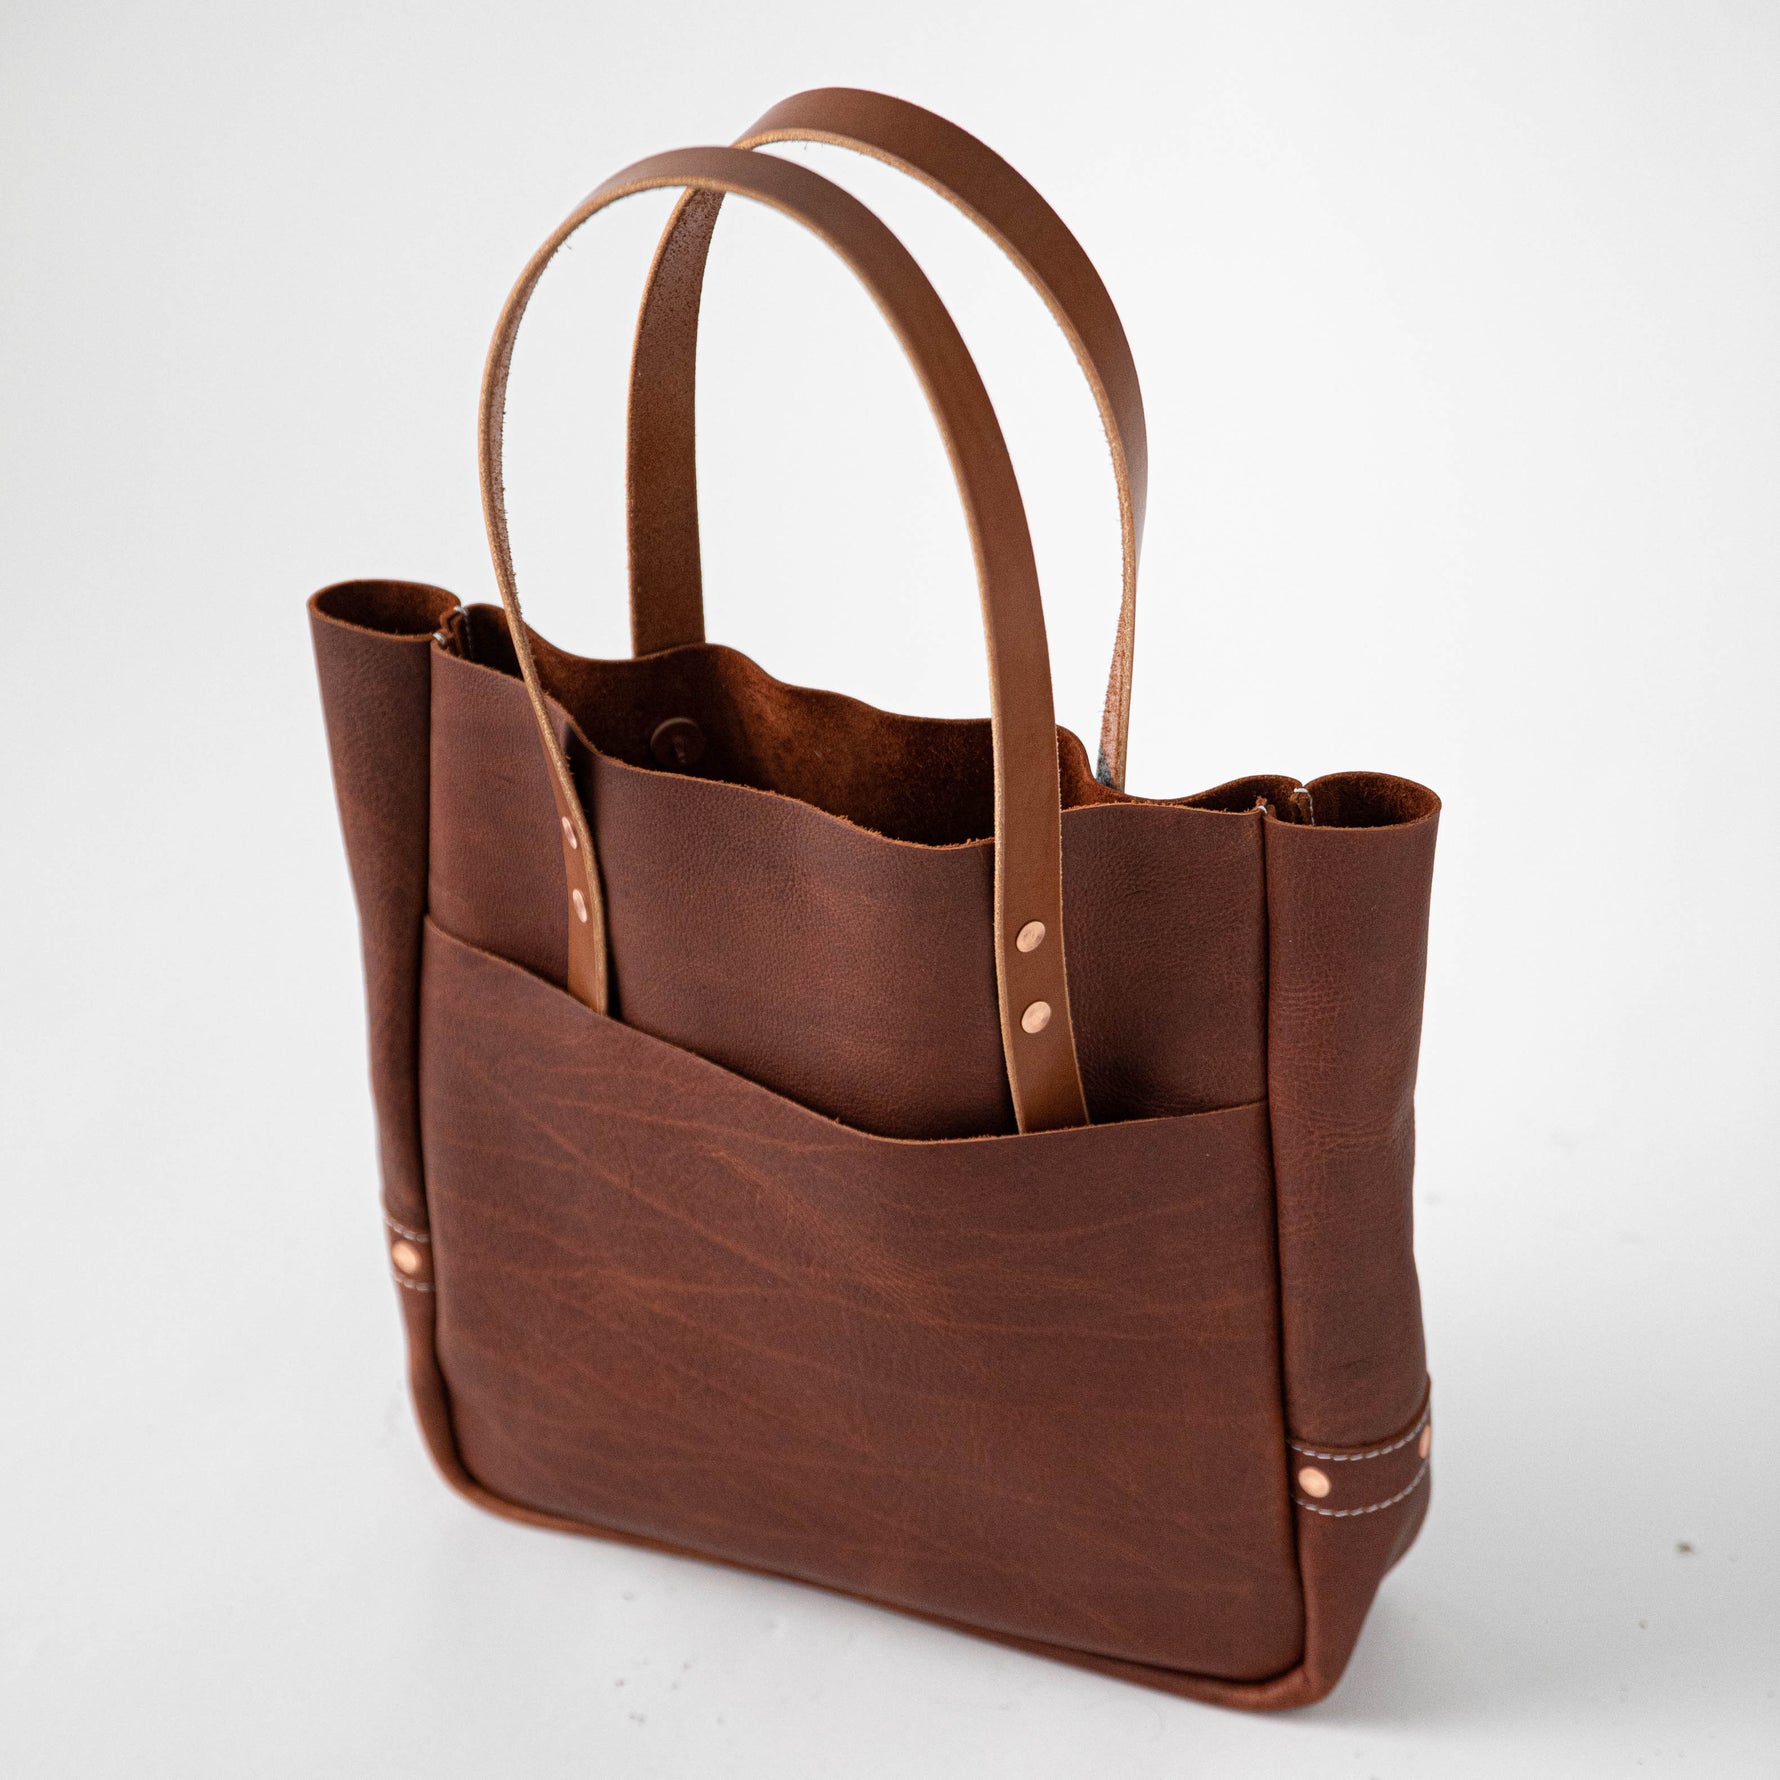 Tan Kodiak Carryall | Large Leather Tote Bags handmade by KMM & Co.